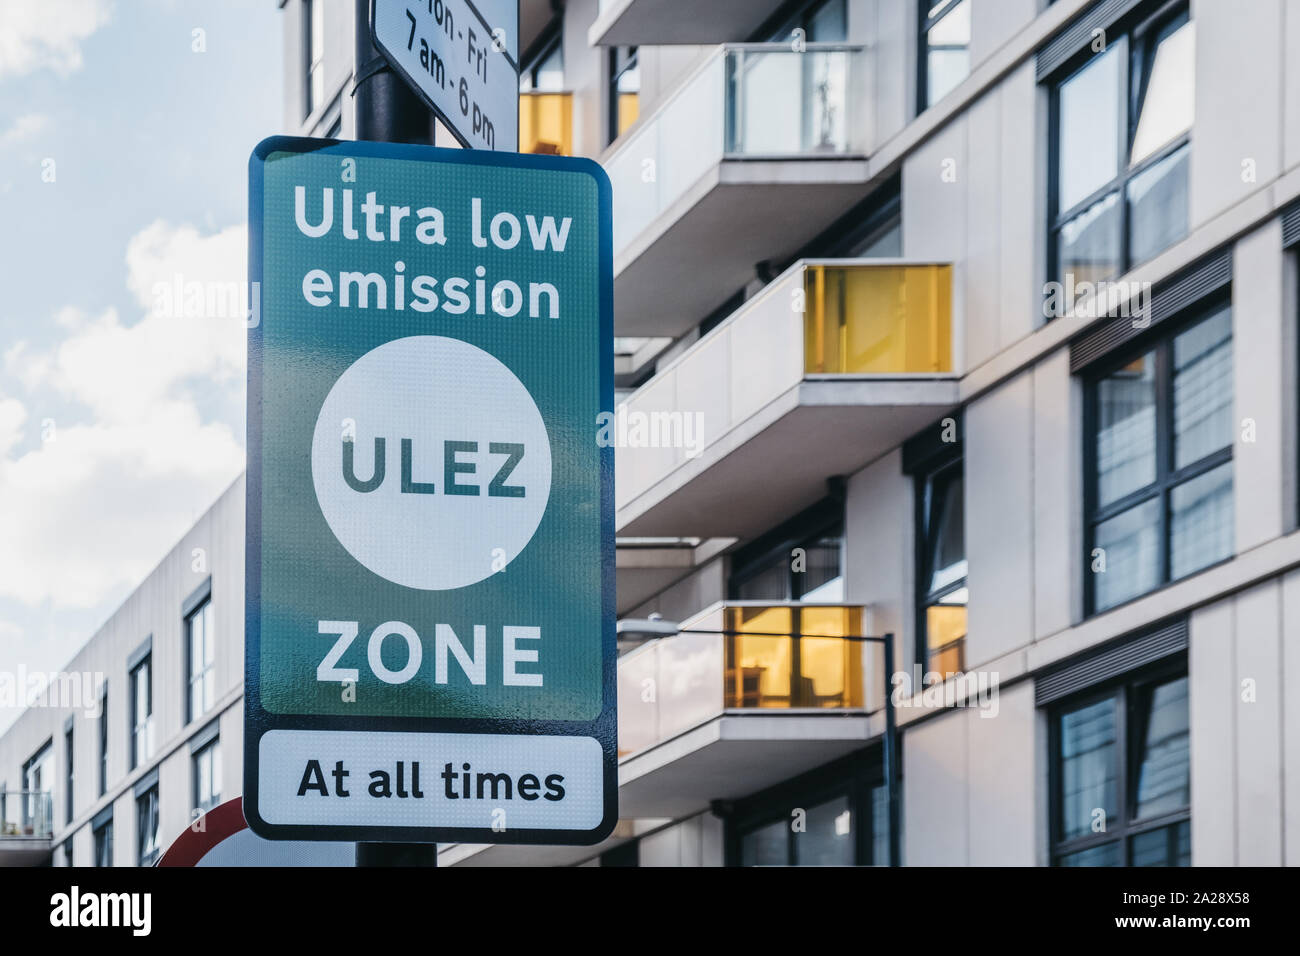 Signs indicating Ultra Low Emission Zone (ULEZ) on a street in London, UK. Stock Photo